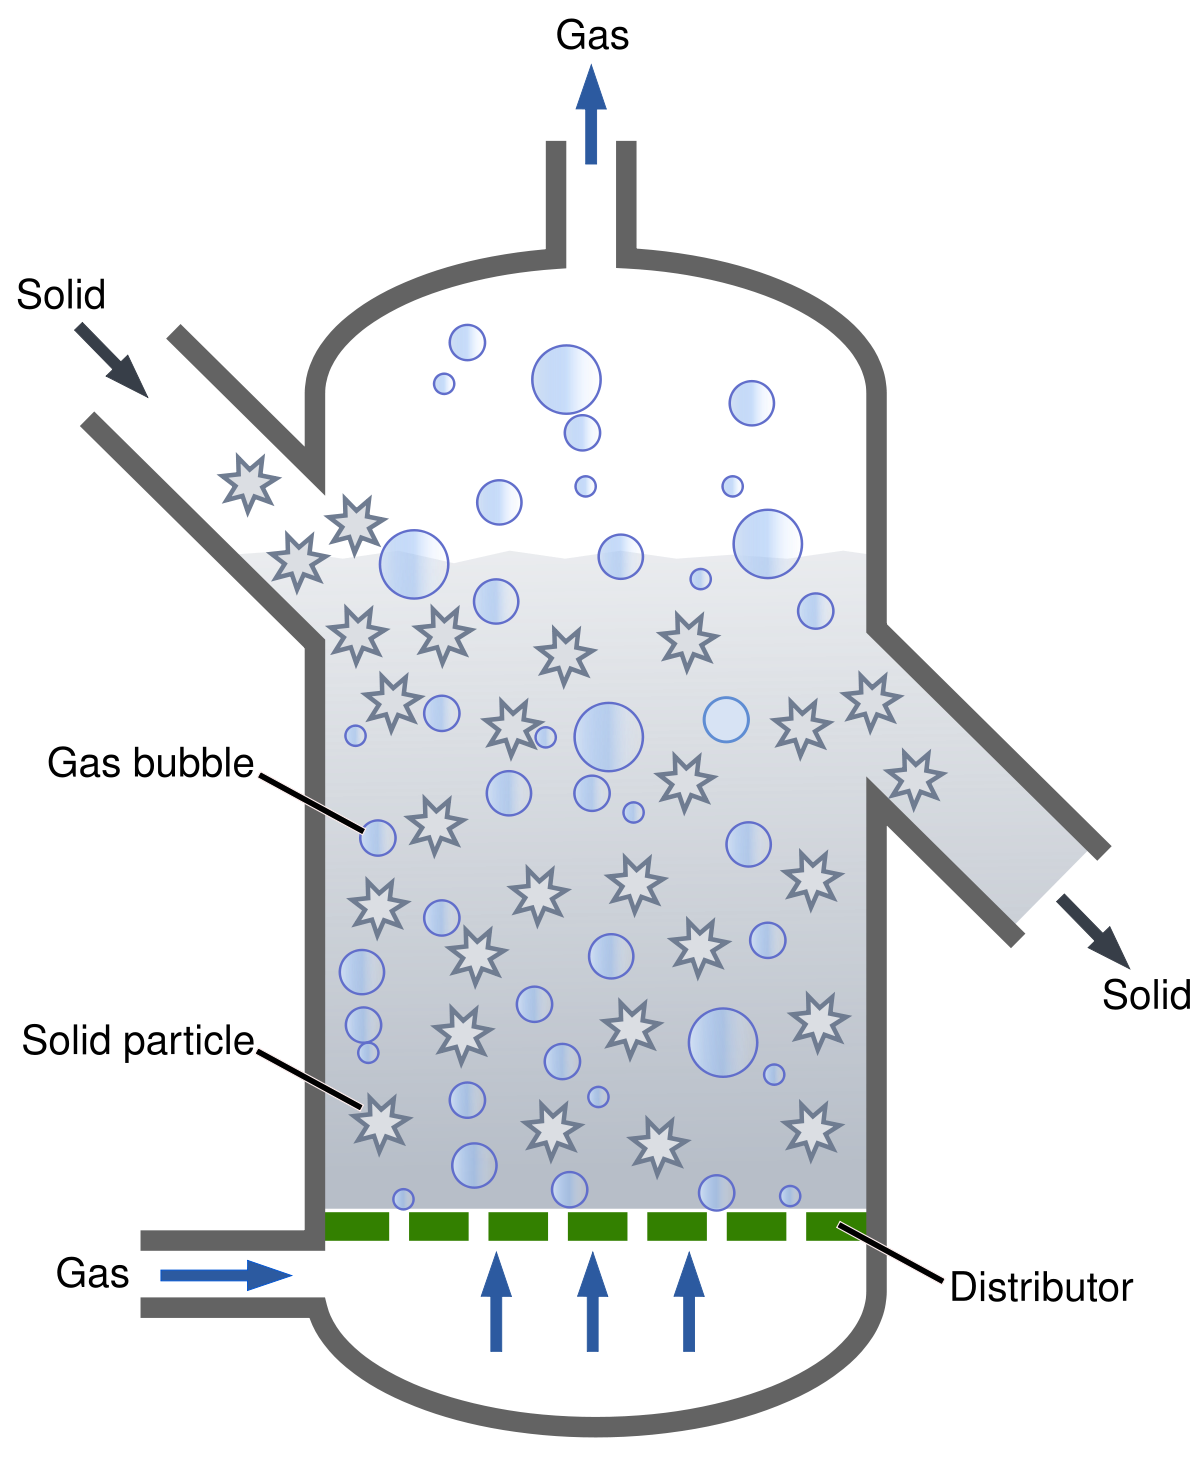 A fluidised bed reactor suspends small catalyst particles by the upward motion of the fluid to be reacted. The fluid is typically a gas with a flow rate high enough to mix the particles without carrying them out of the reactor